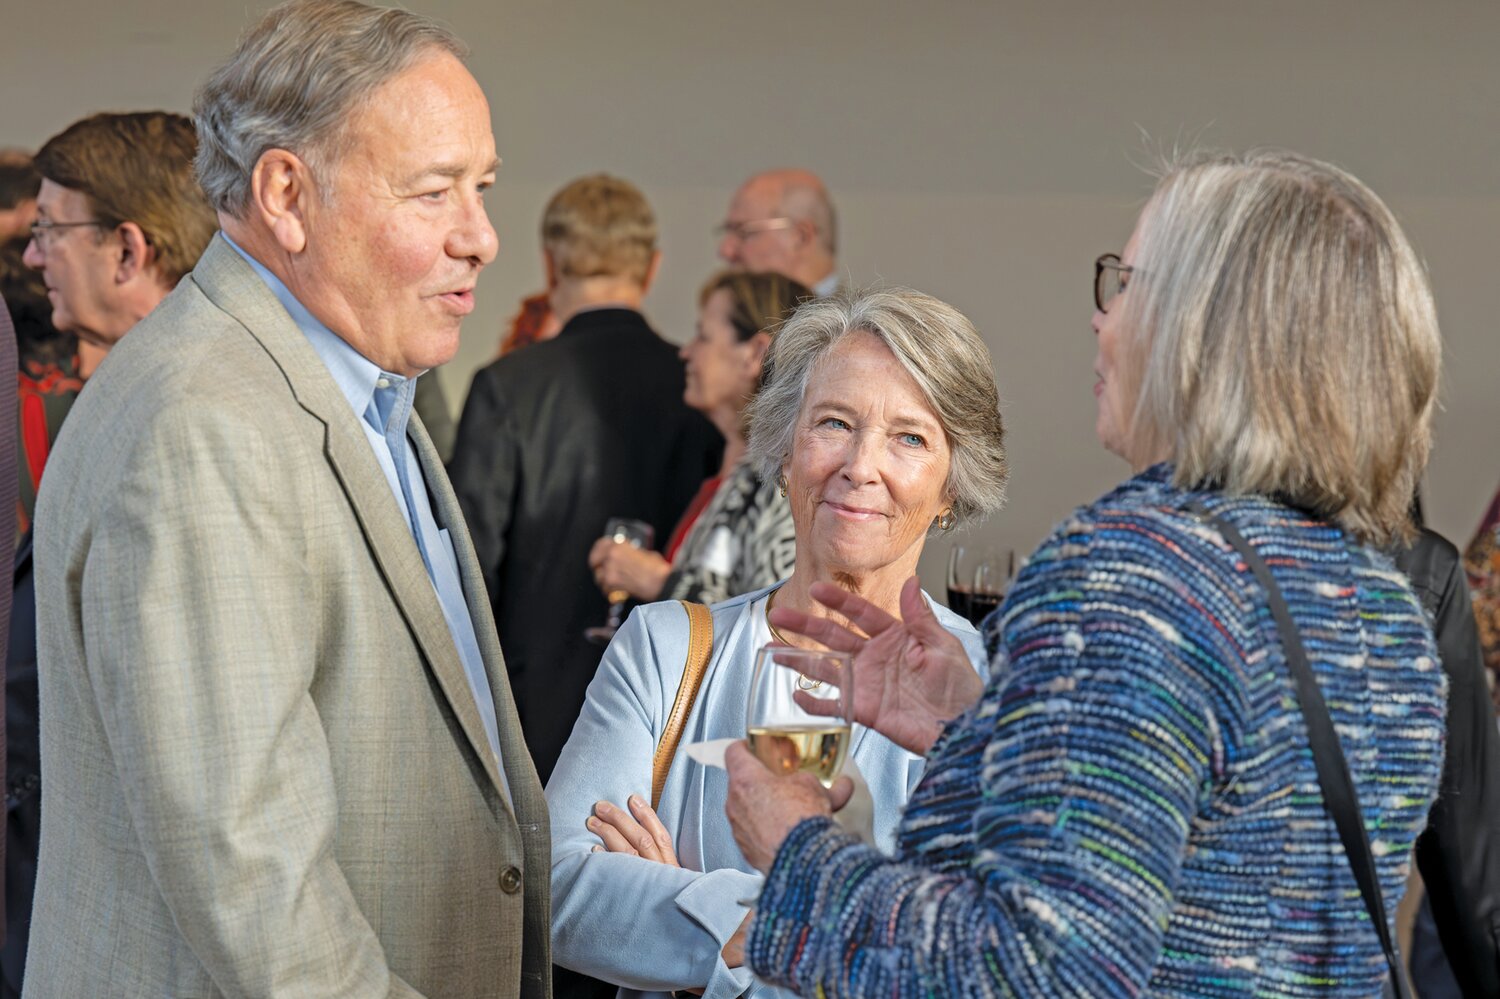 George and Anne Yarnell chat with an attendee of the “Happy to be Here” celebration.